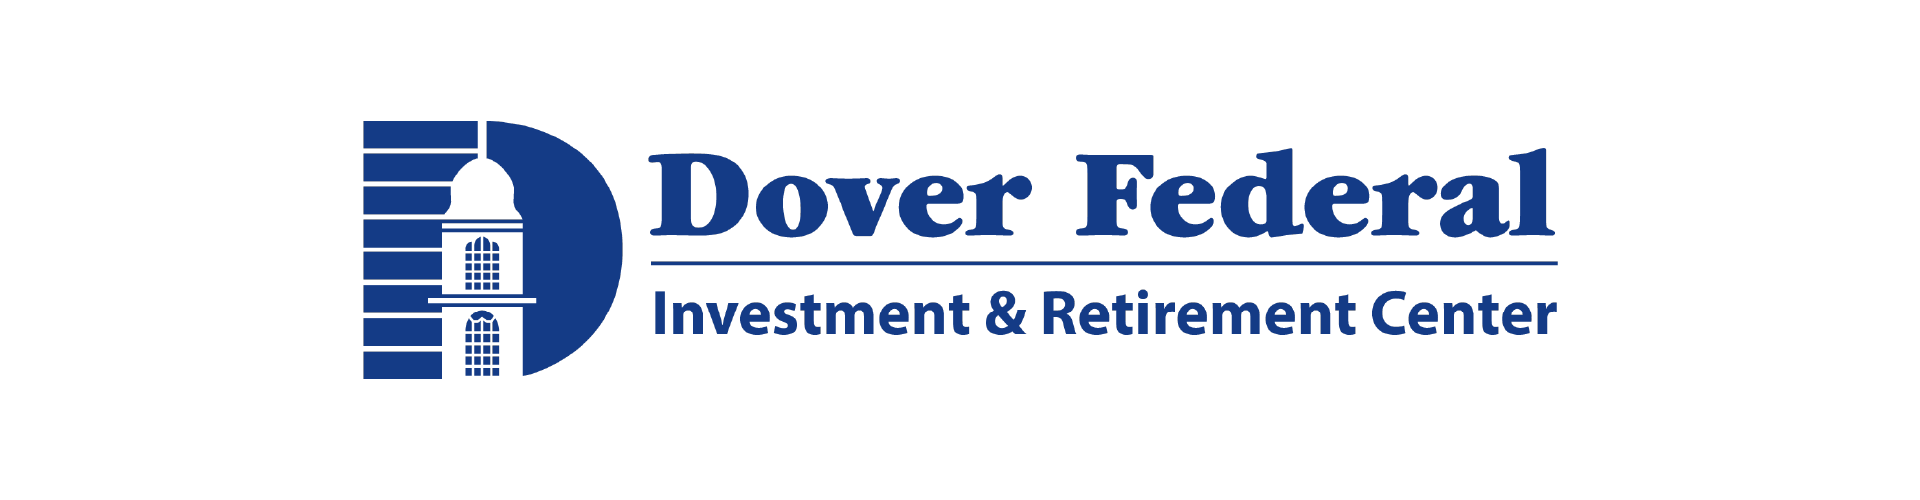 Dover Federal Investment & Retirement Services